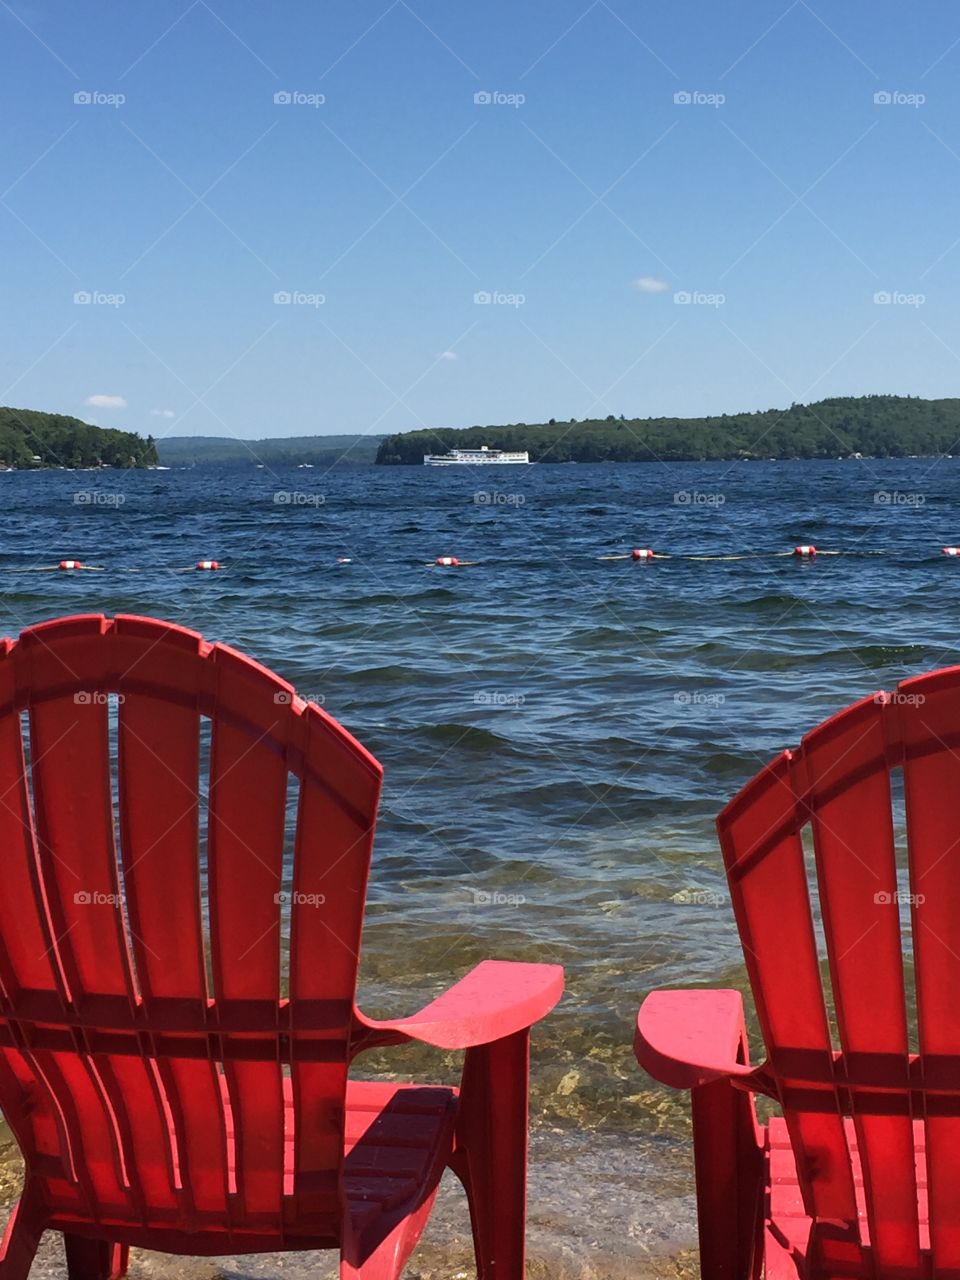 Two red chairs on beach in front of lake